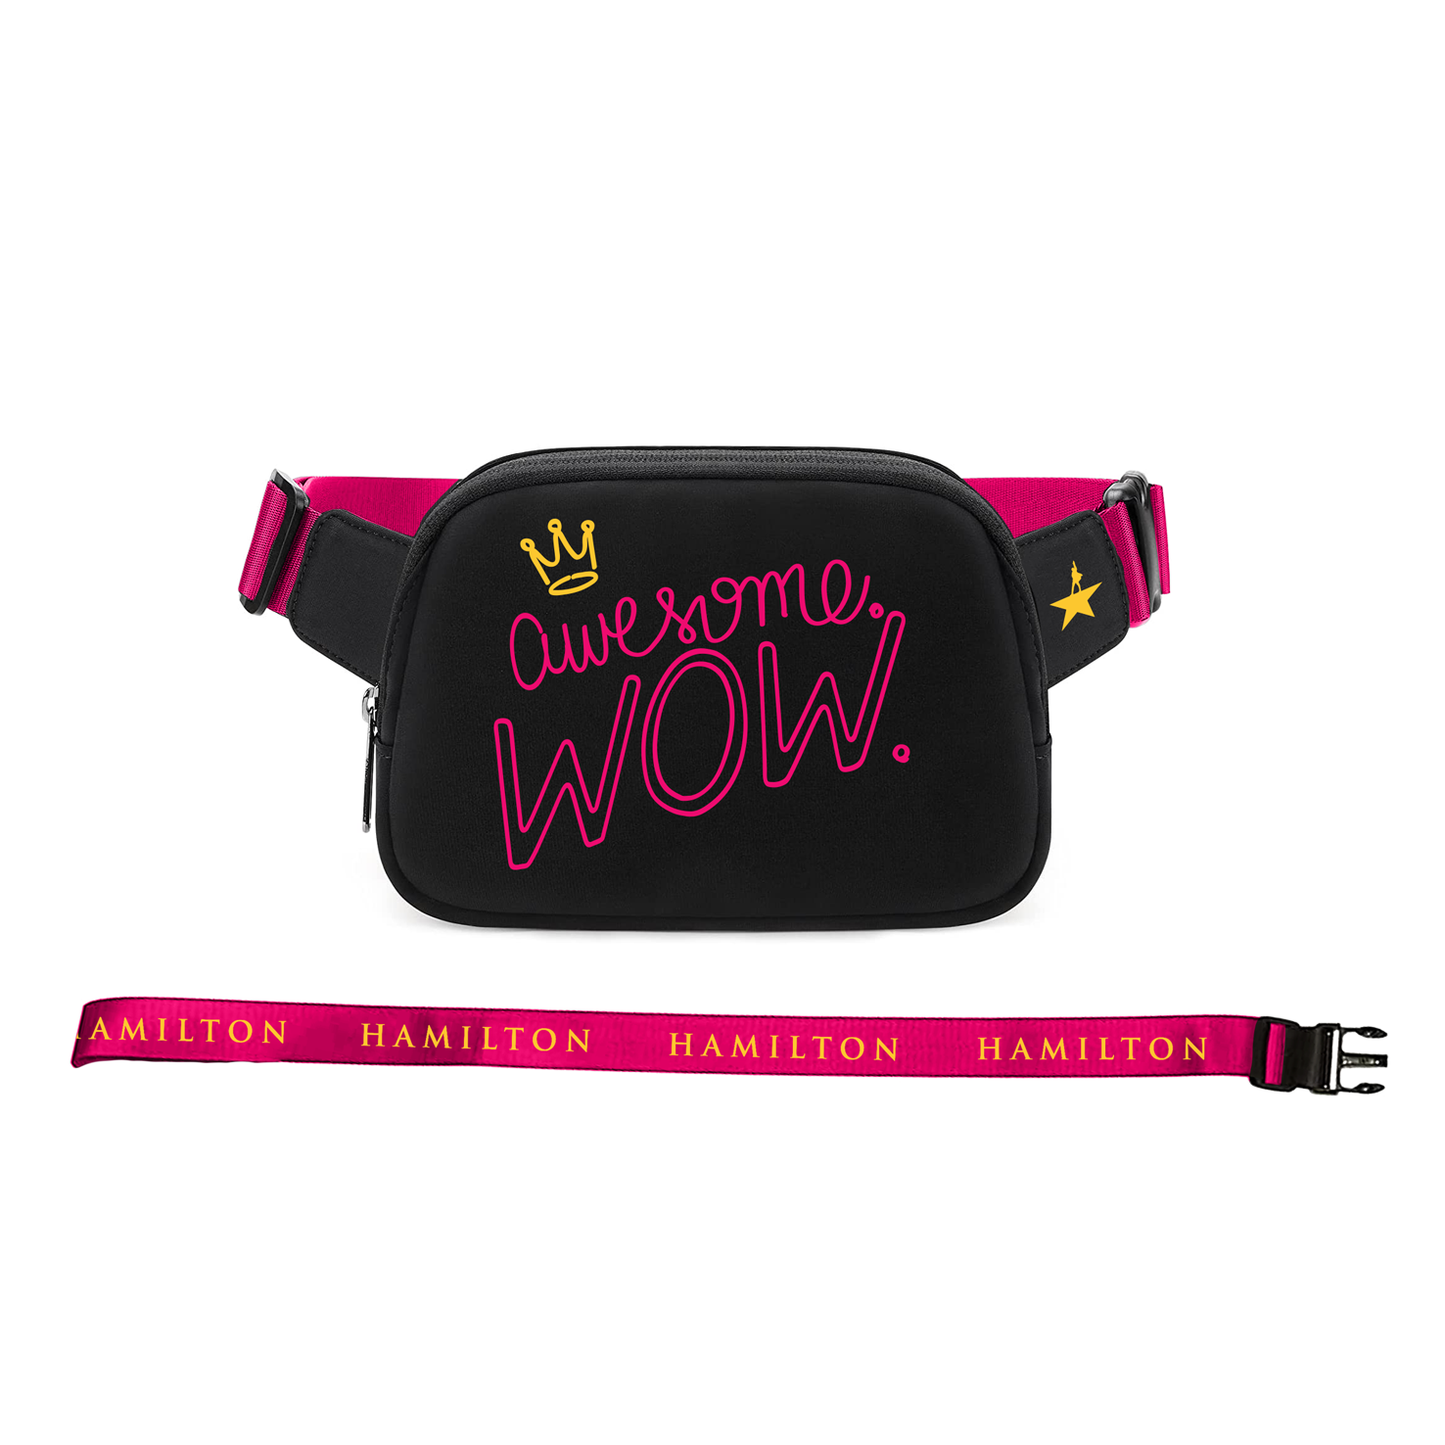 HAMILTON Awesome Wow Fanny Pack